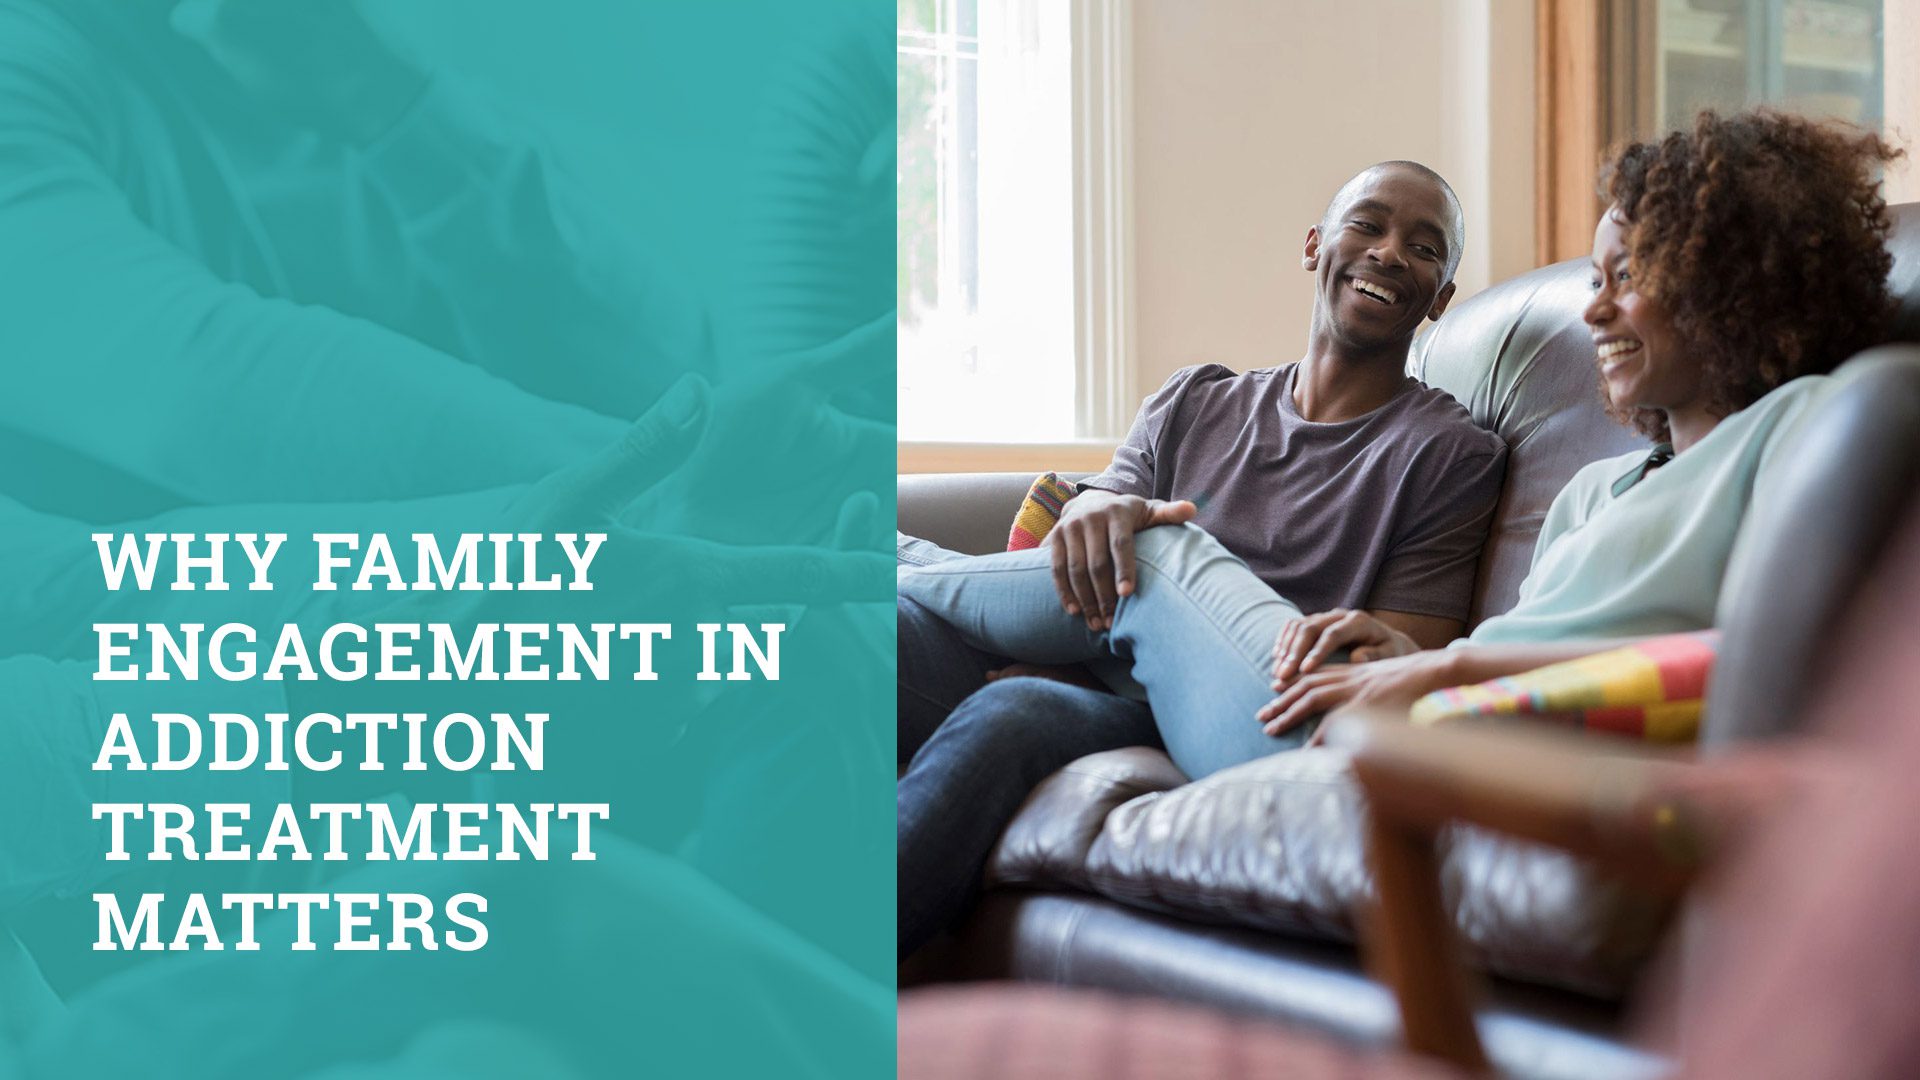 Why Family Engagement in Addiction Treatment Matters